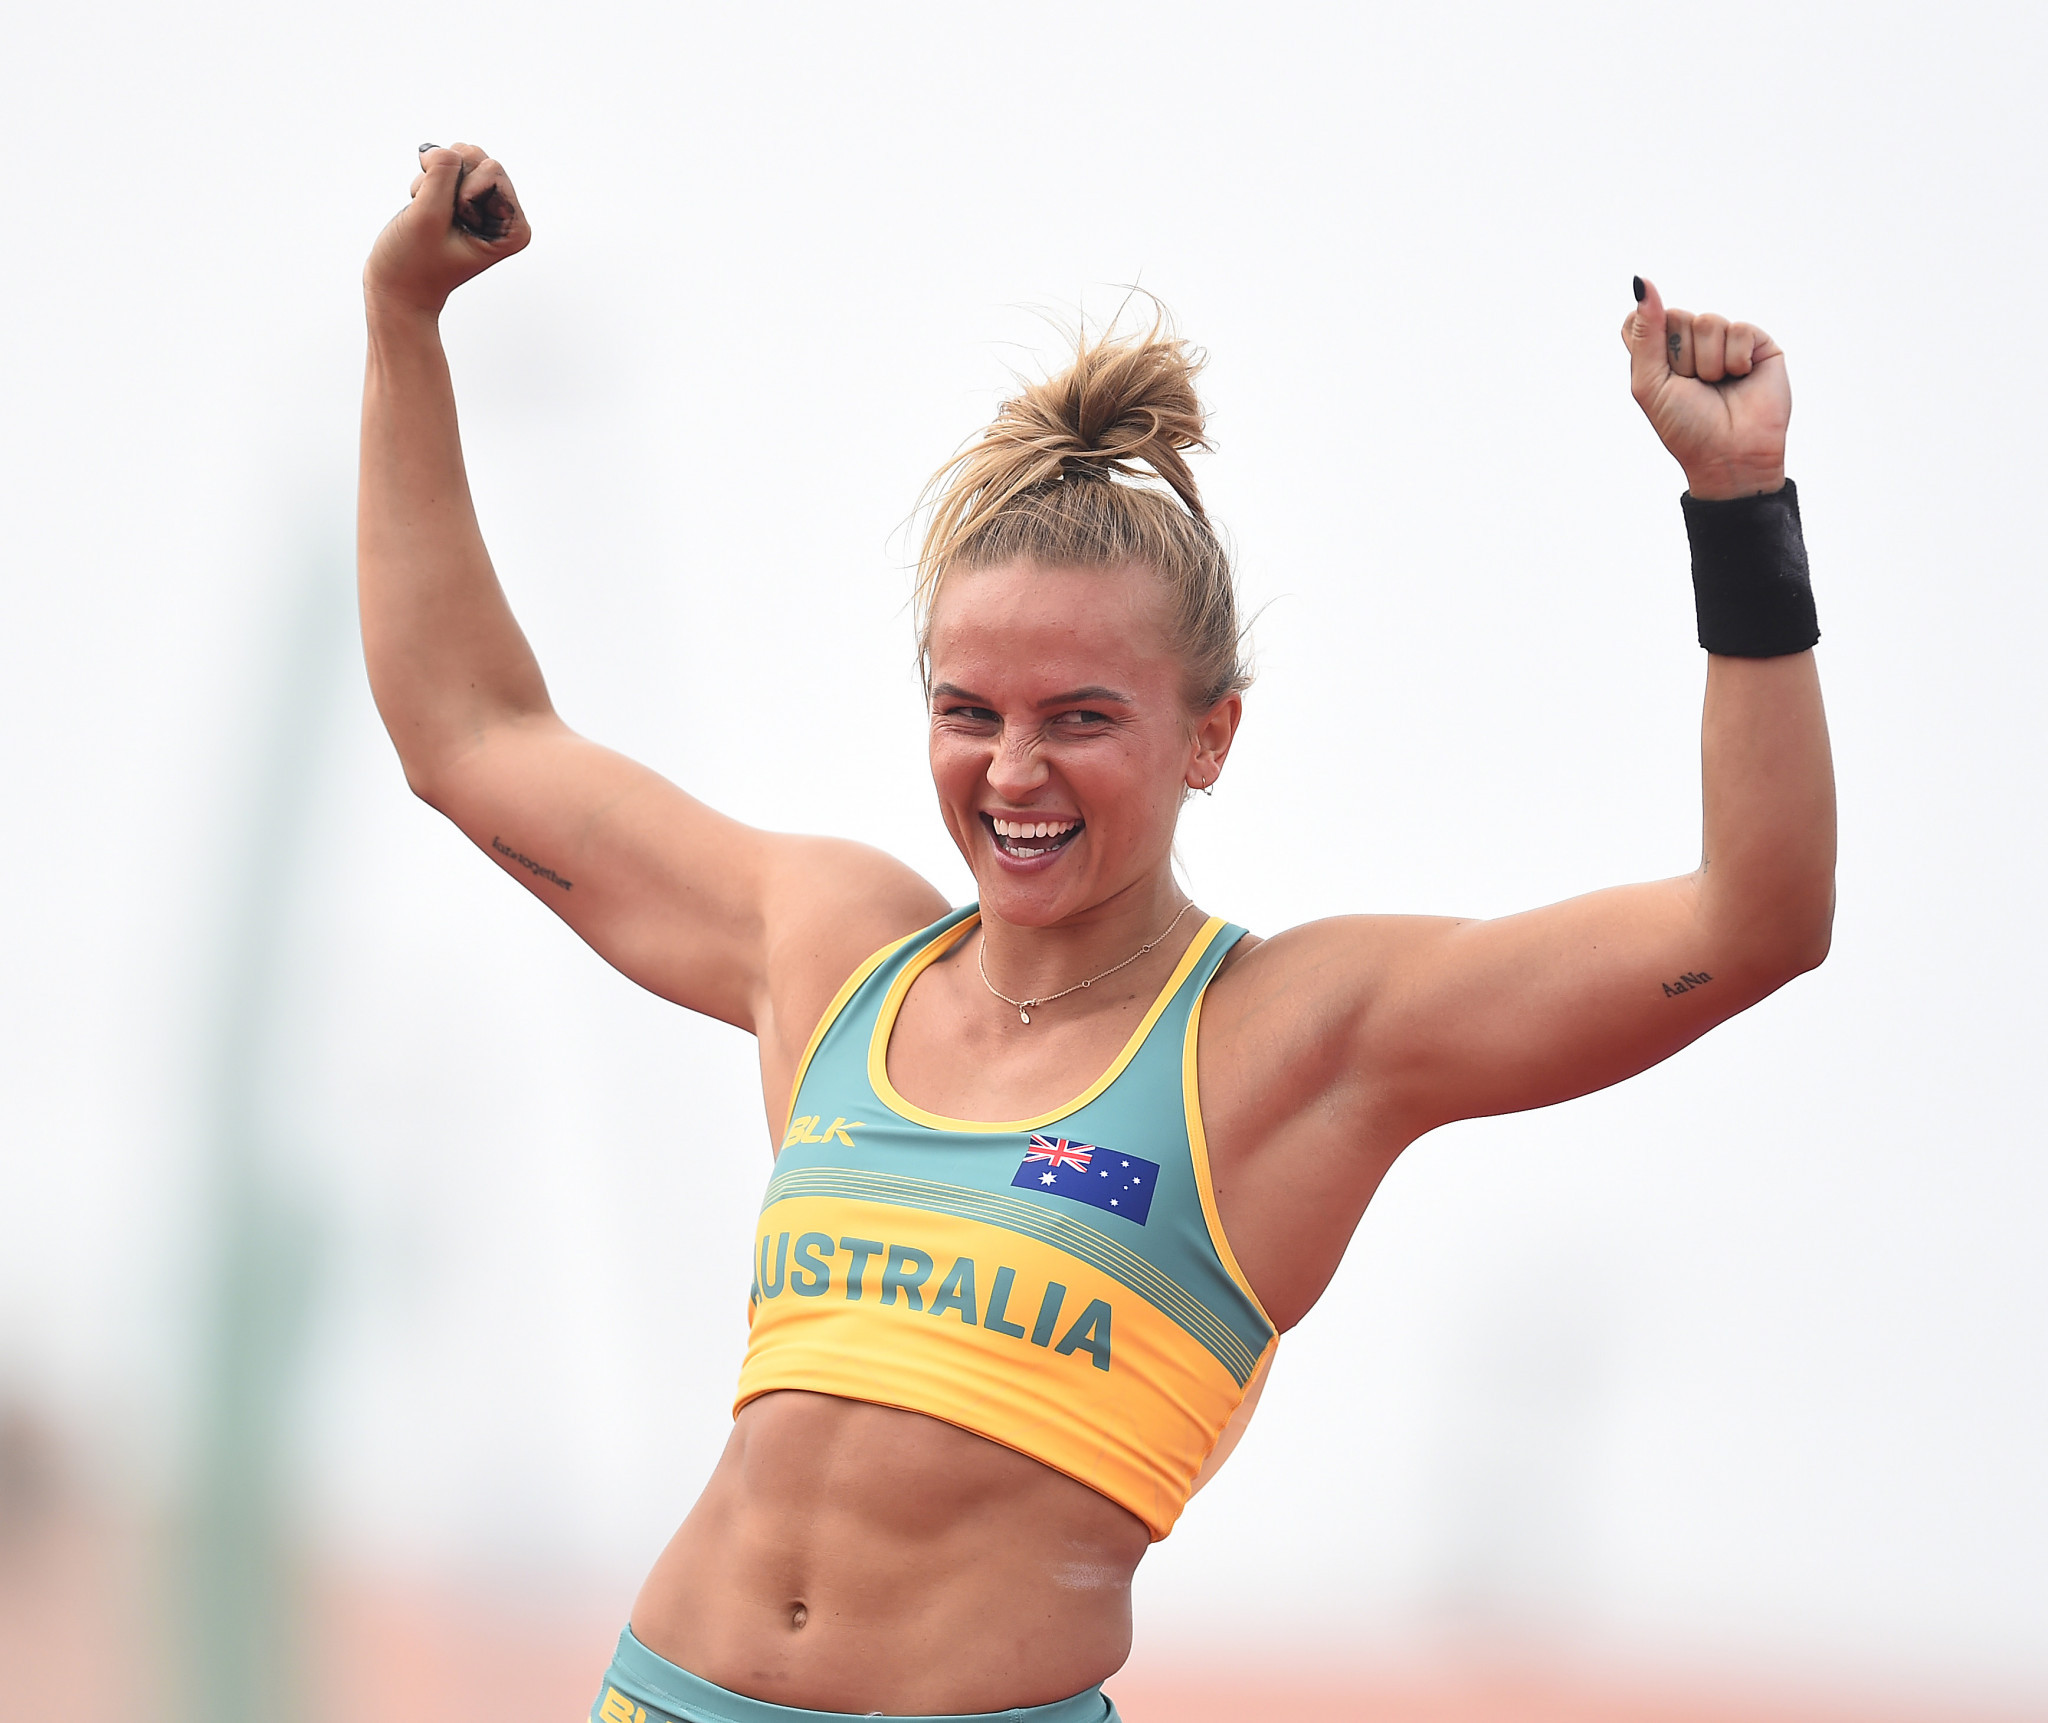 Australia’s Elizaveta Parnova provided one of the performances of the day as the Oceania Athletics Championships came to an end in Townsville ©Getty Images